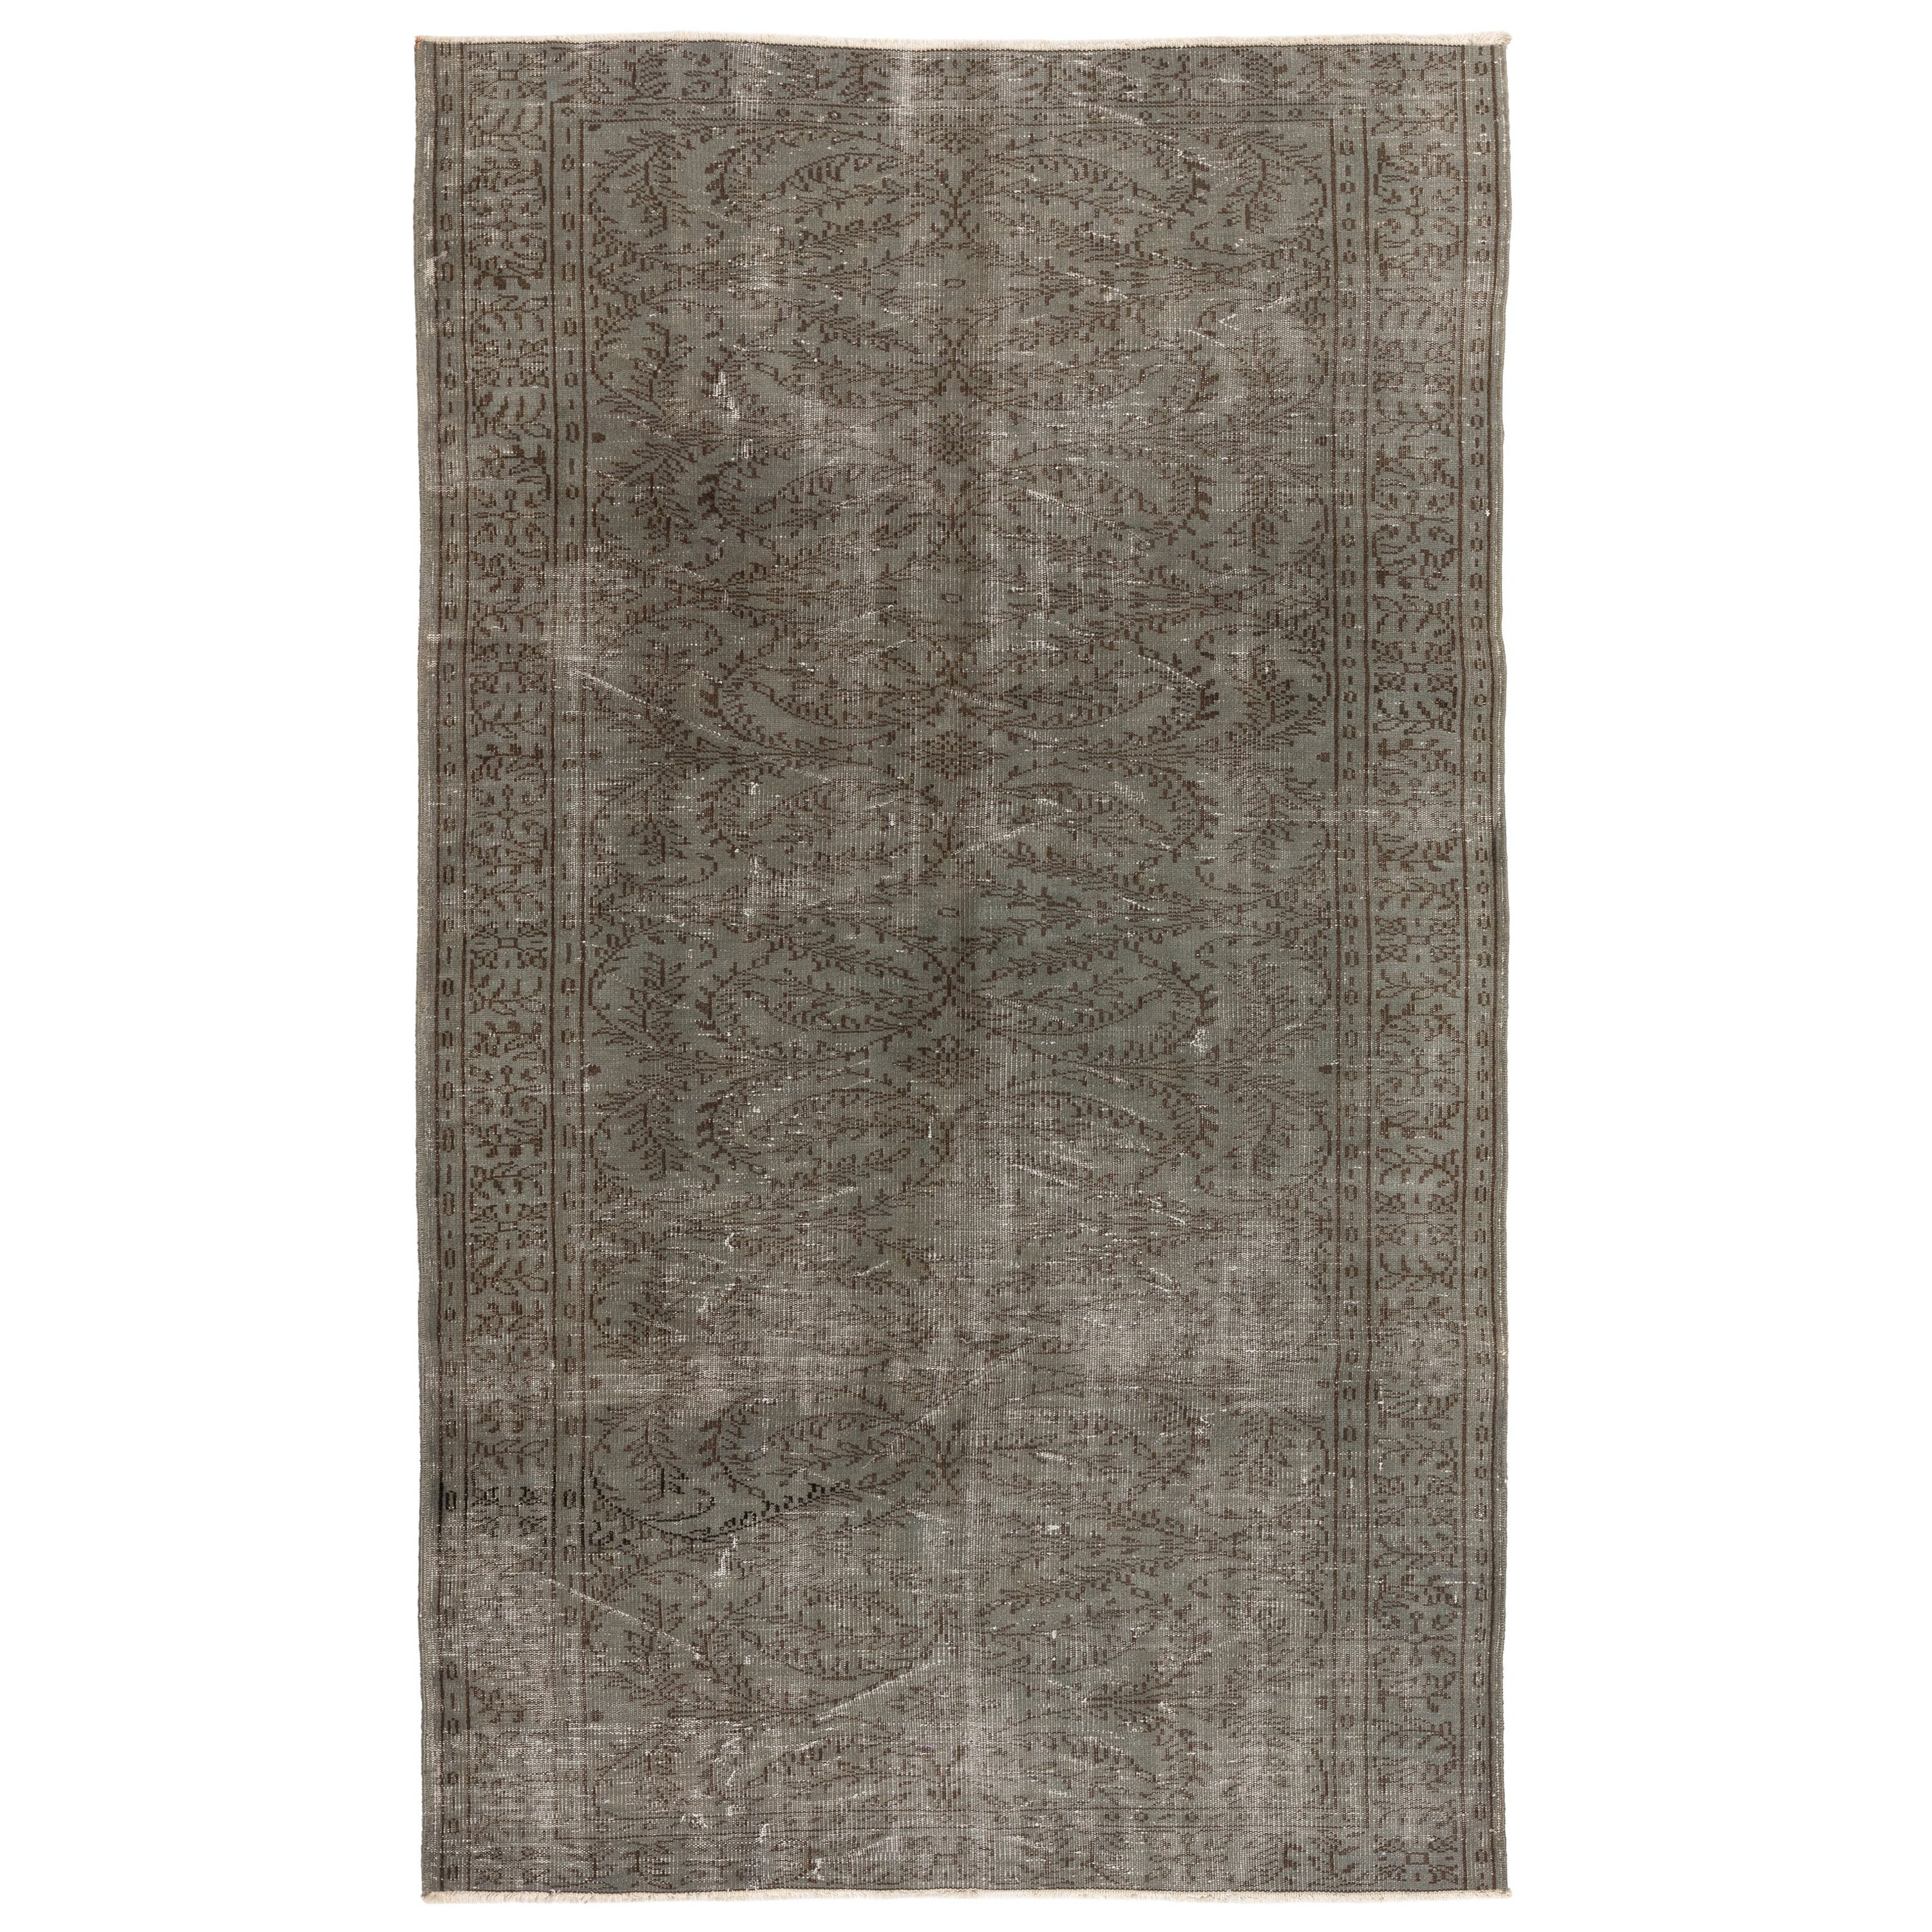 Midcentury Handmade Turkish Wool Area Rug in Gray for Modern Interiors For Sale